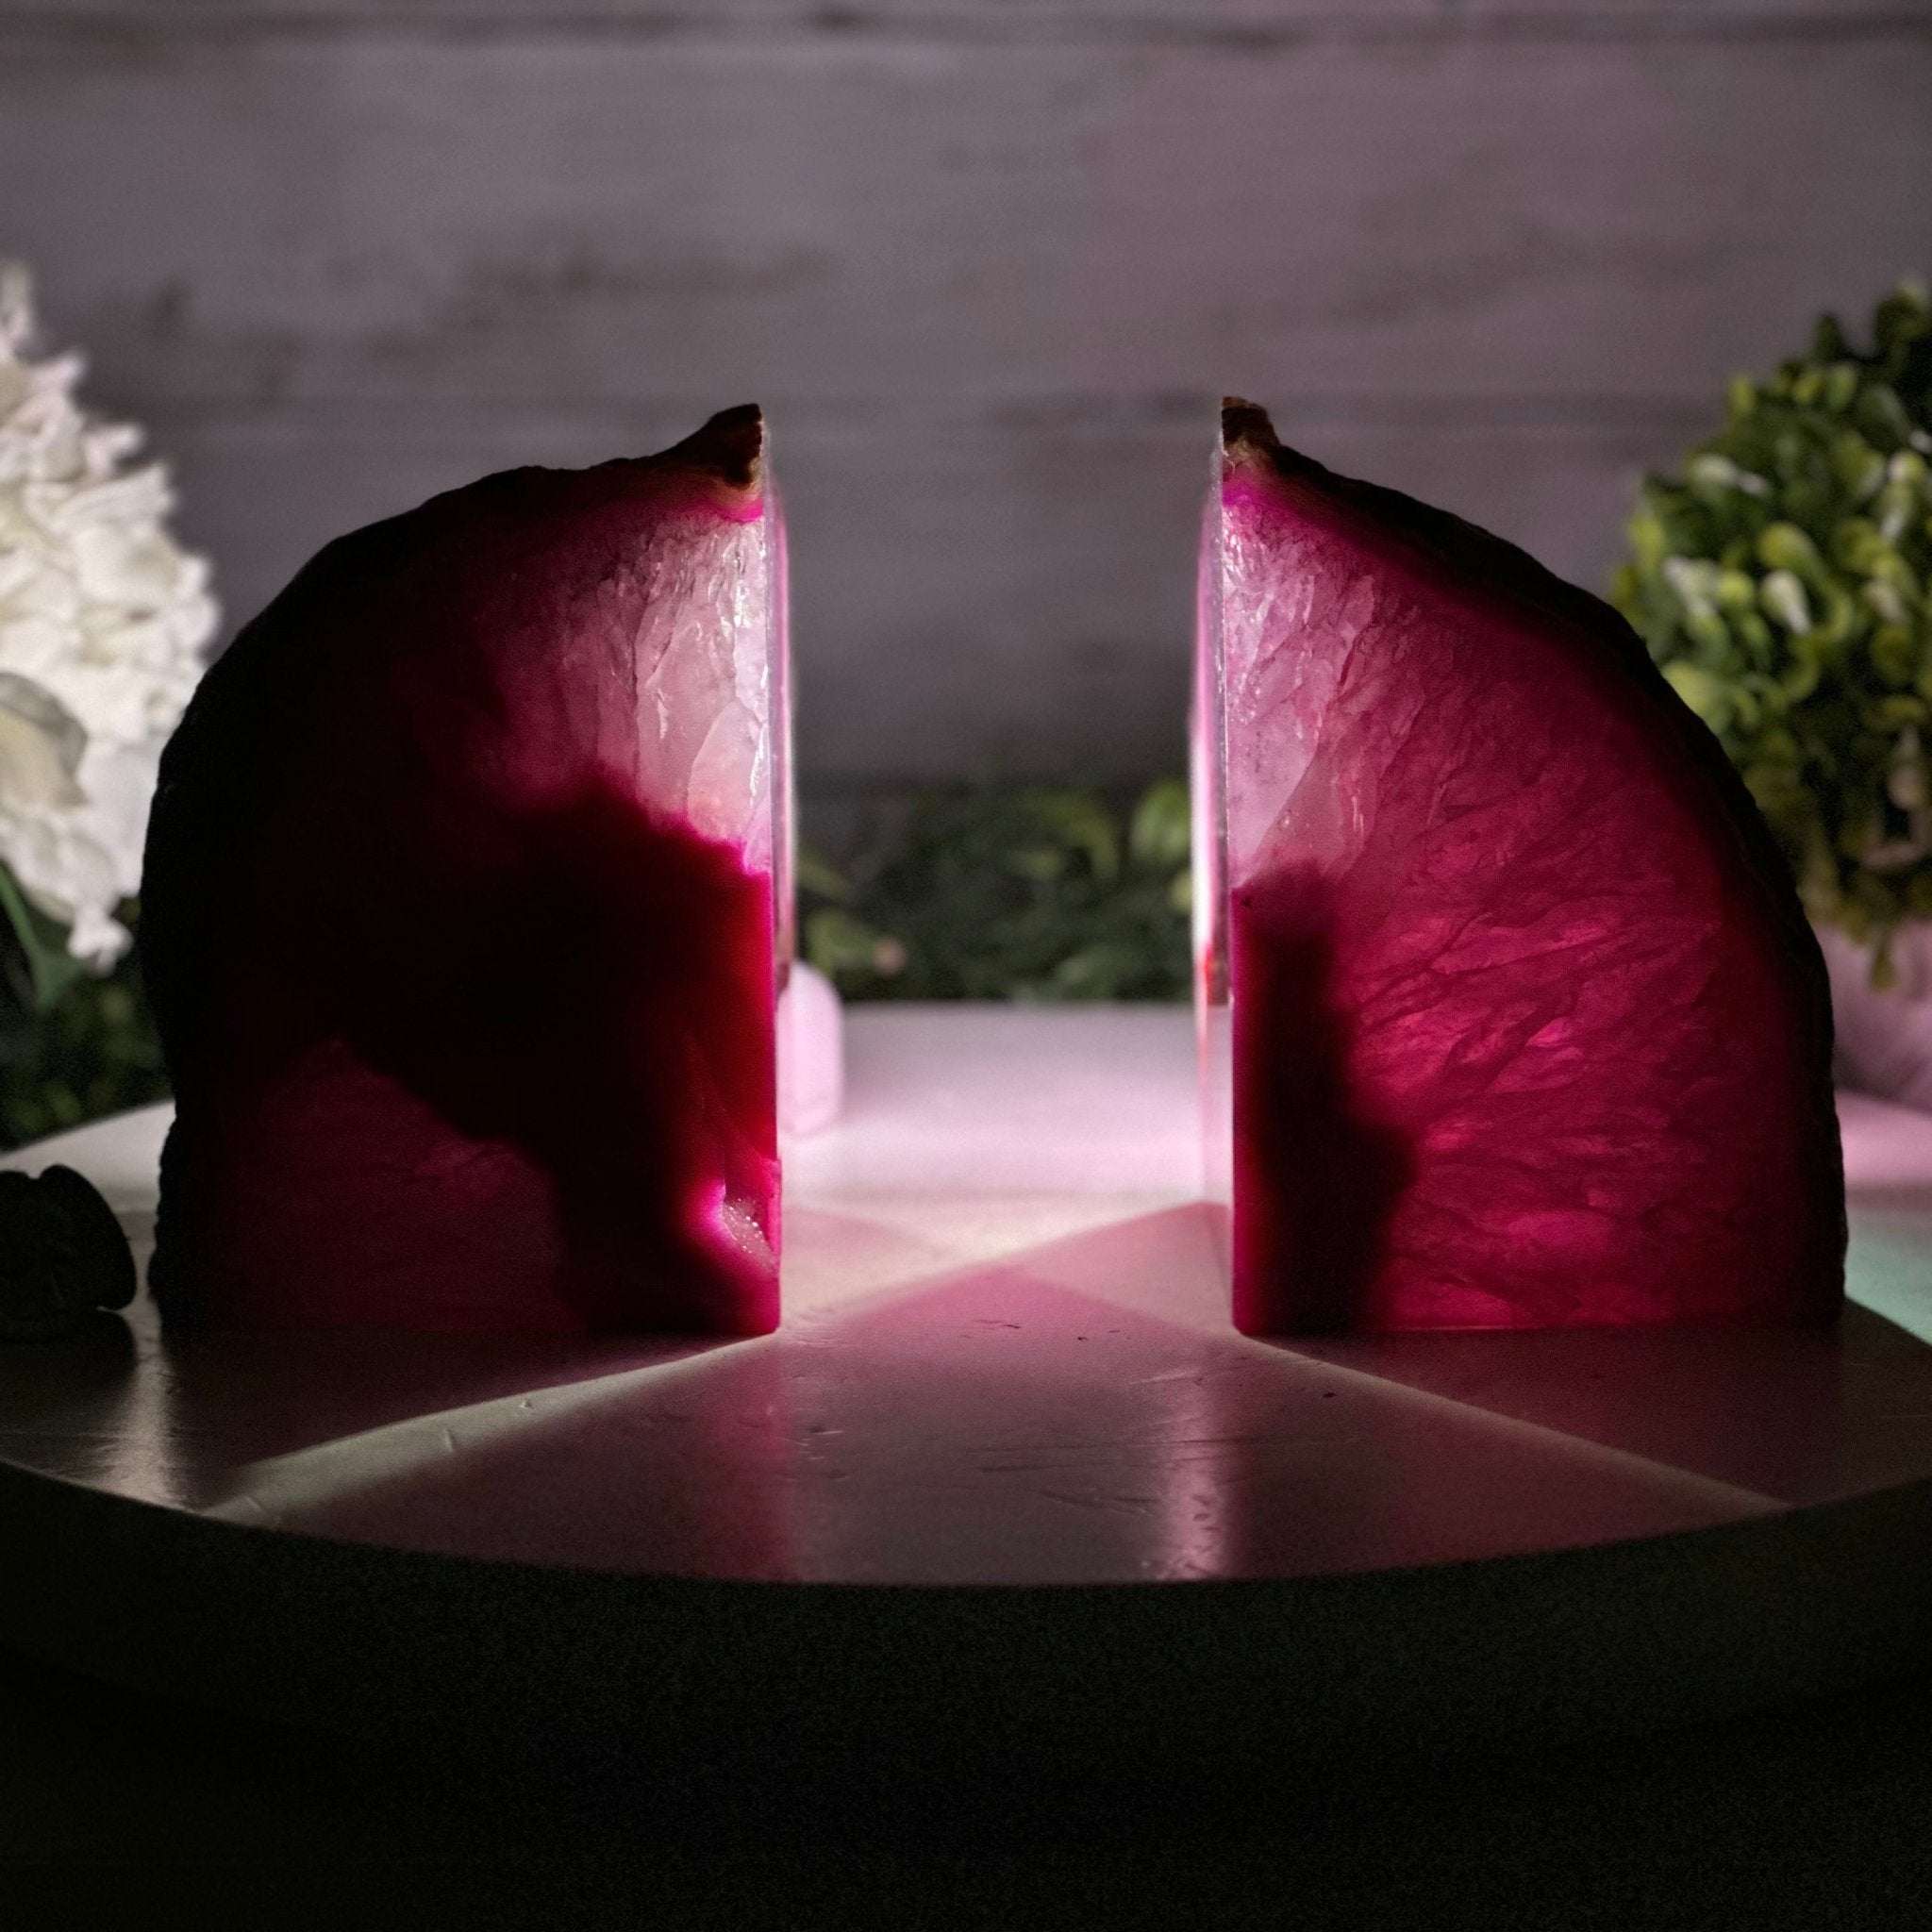 Pink Dyed Brazilian Agate Stone Bookends, 9.6 lbs & 5.4" tall #5151PA-028 - Brazil GemsBrazil GemsPink Dyed Brazilian Agate Stone Bookends, 9.6 lbs & 5.4" tall #5151PA-028Bookends5151PA-028